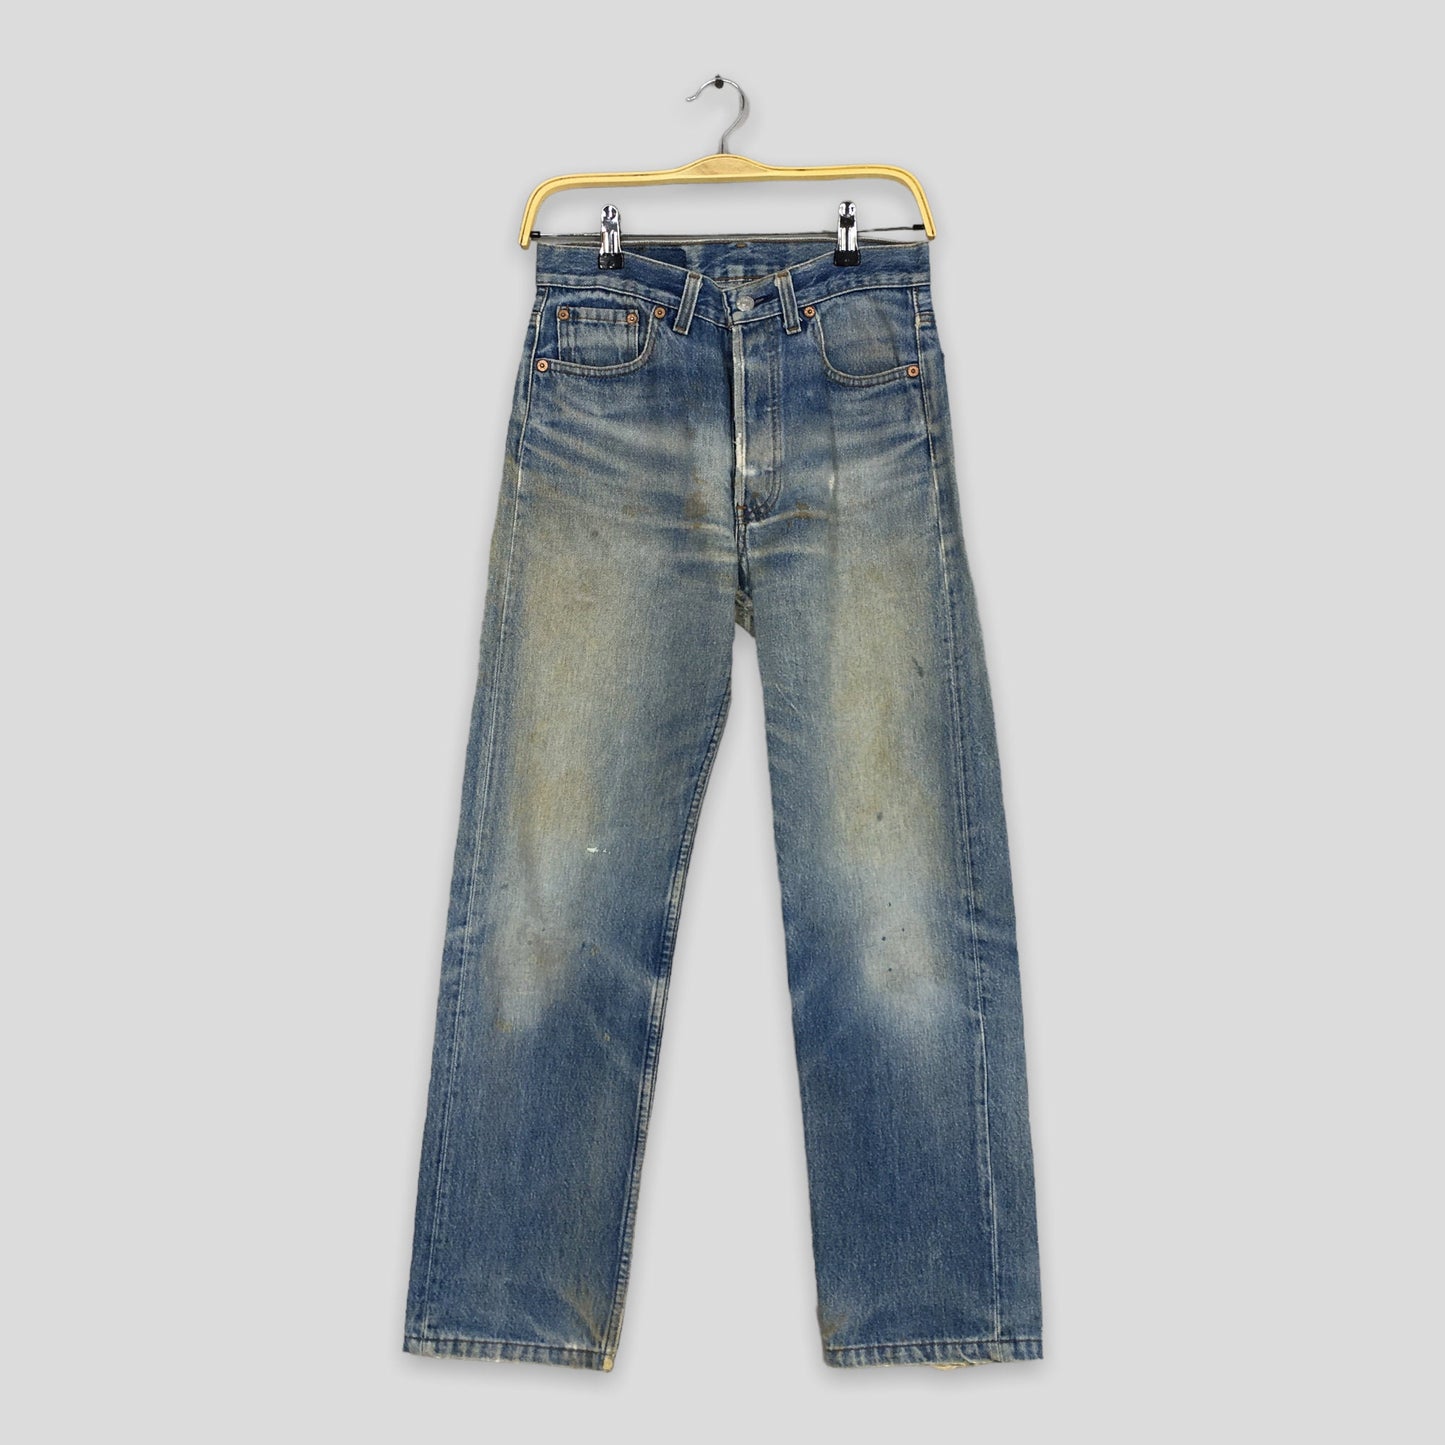 Levi's 501 Light Wash Jeans Faded Size 27x28